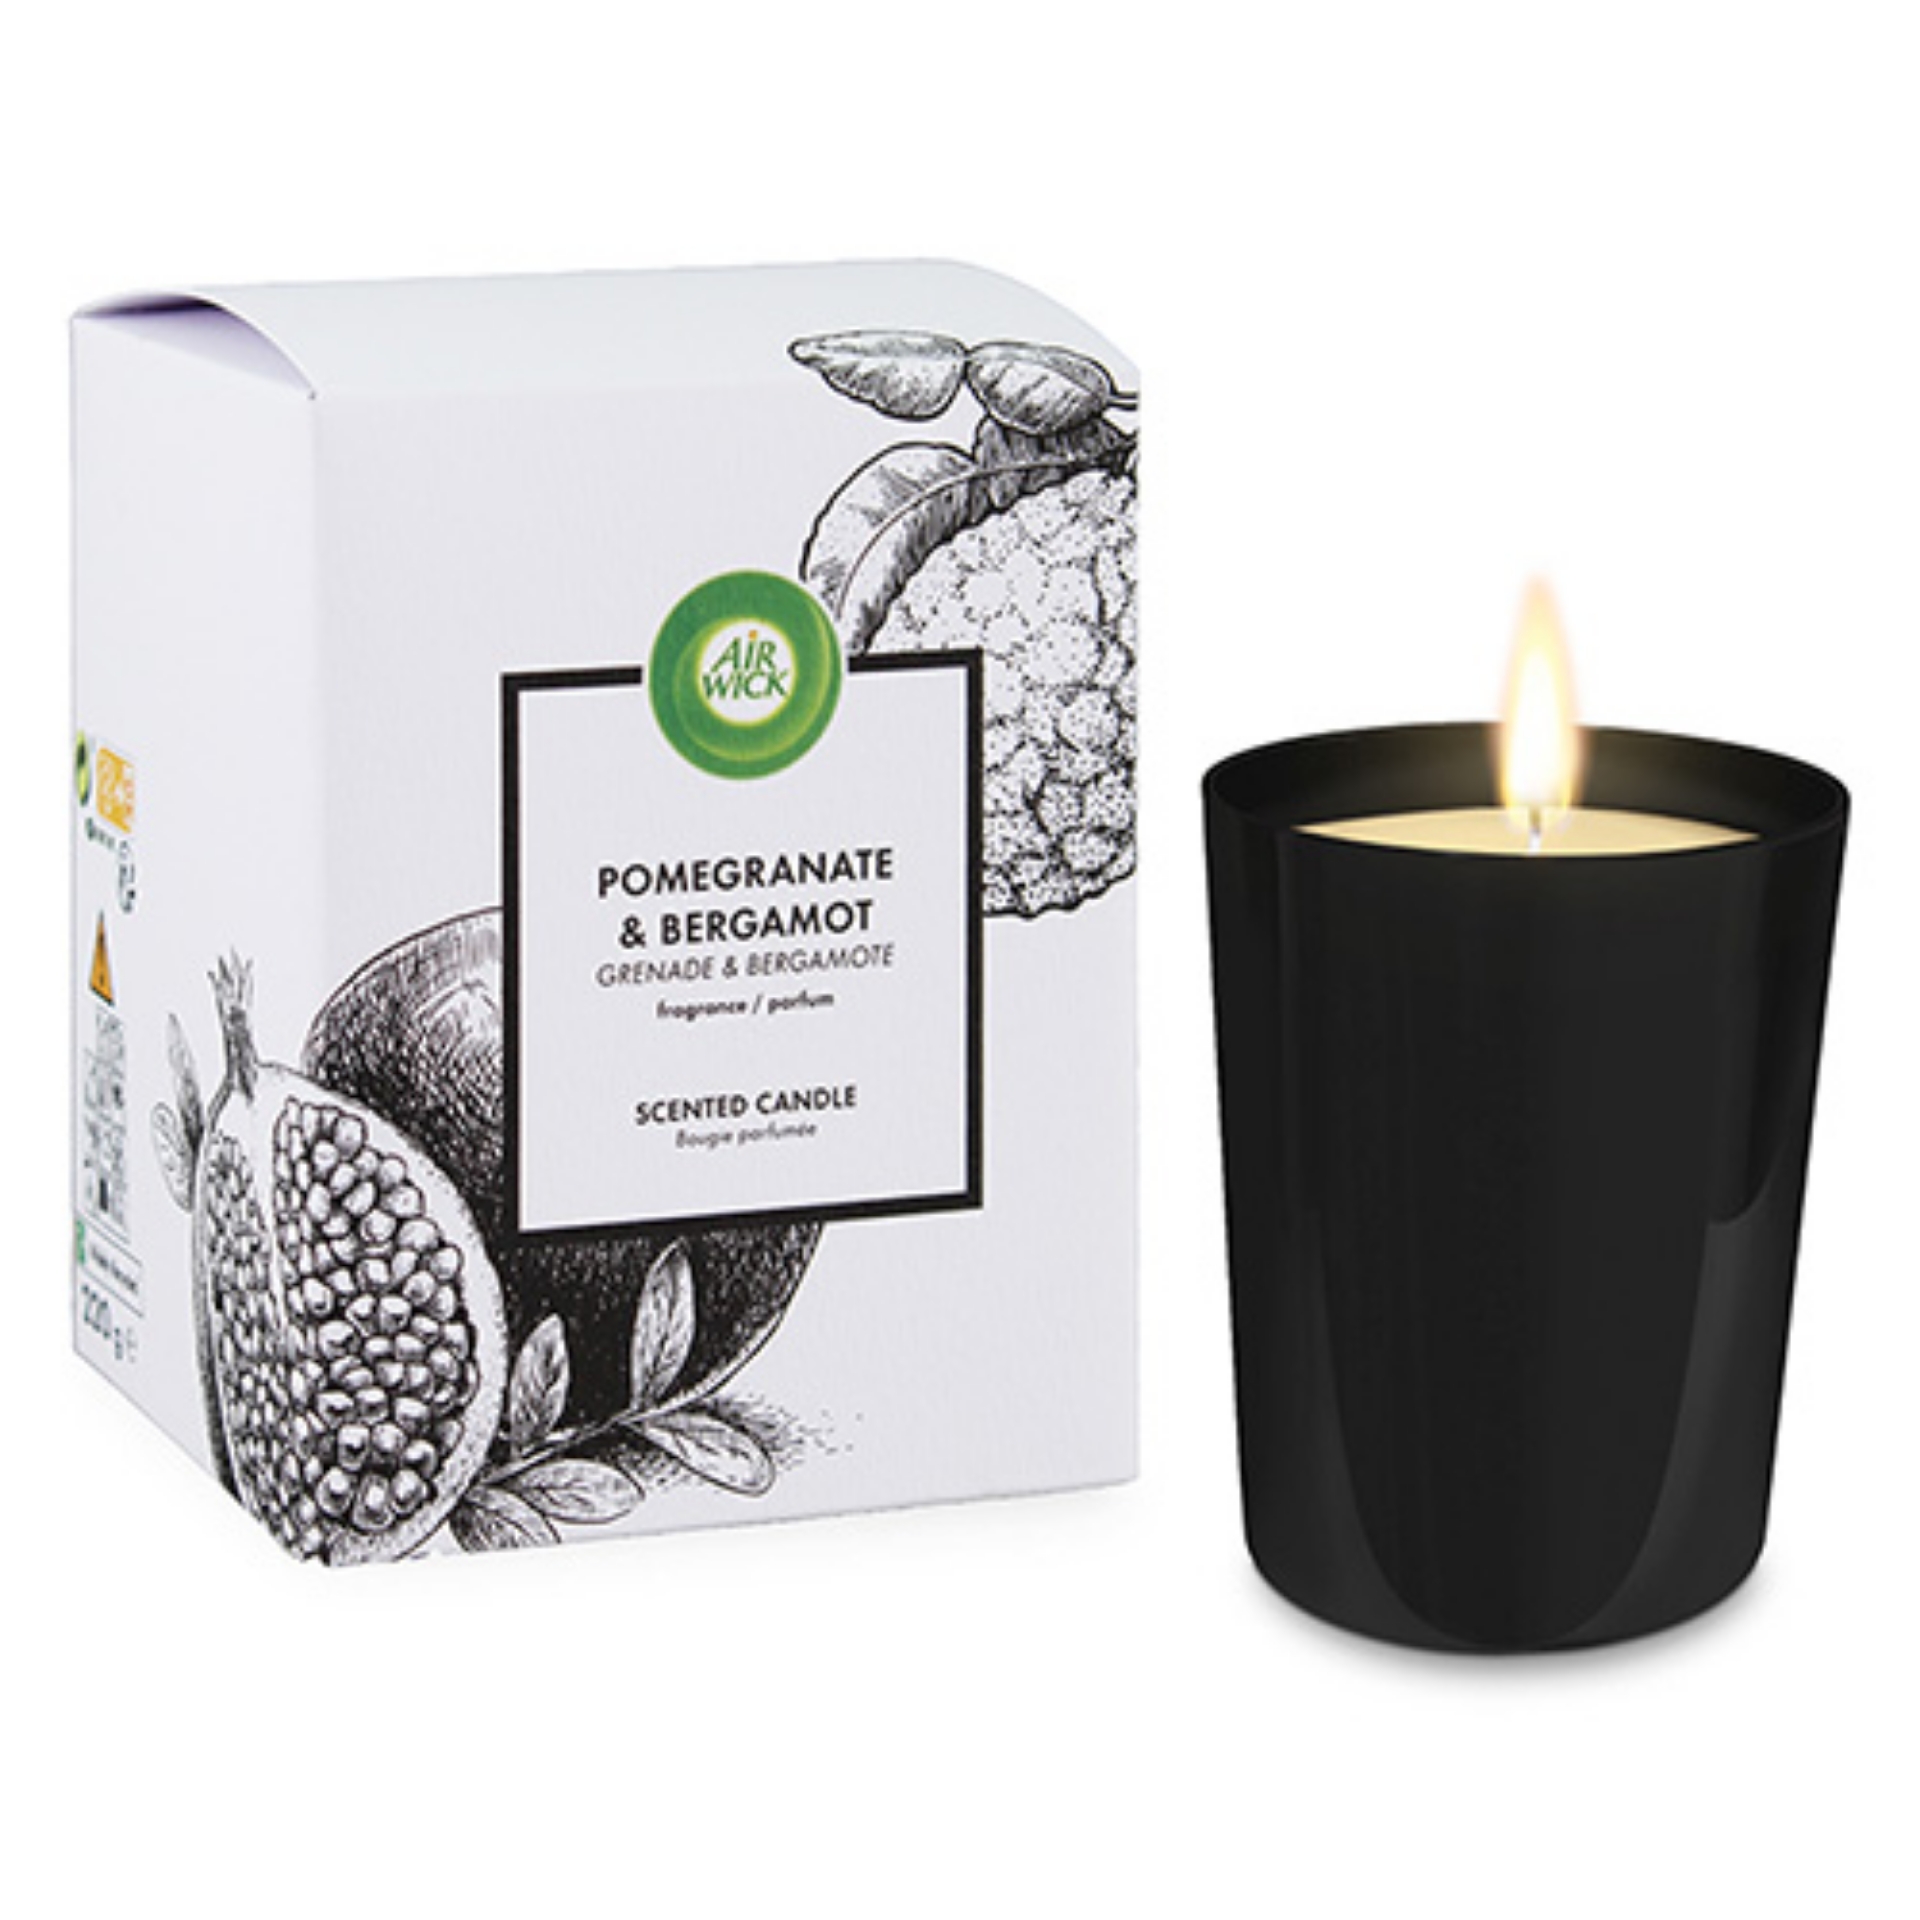 Picture of AIRWICK BOXED CANDLE - POMEGRANATE (wsl)